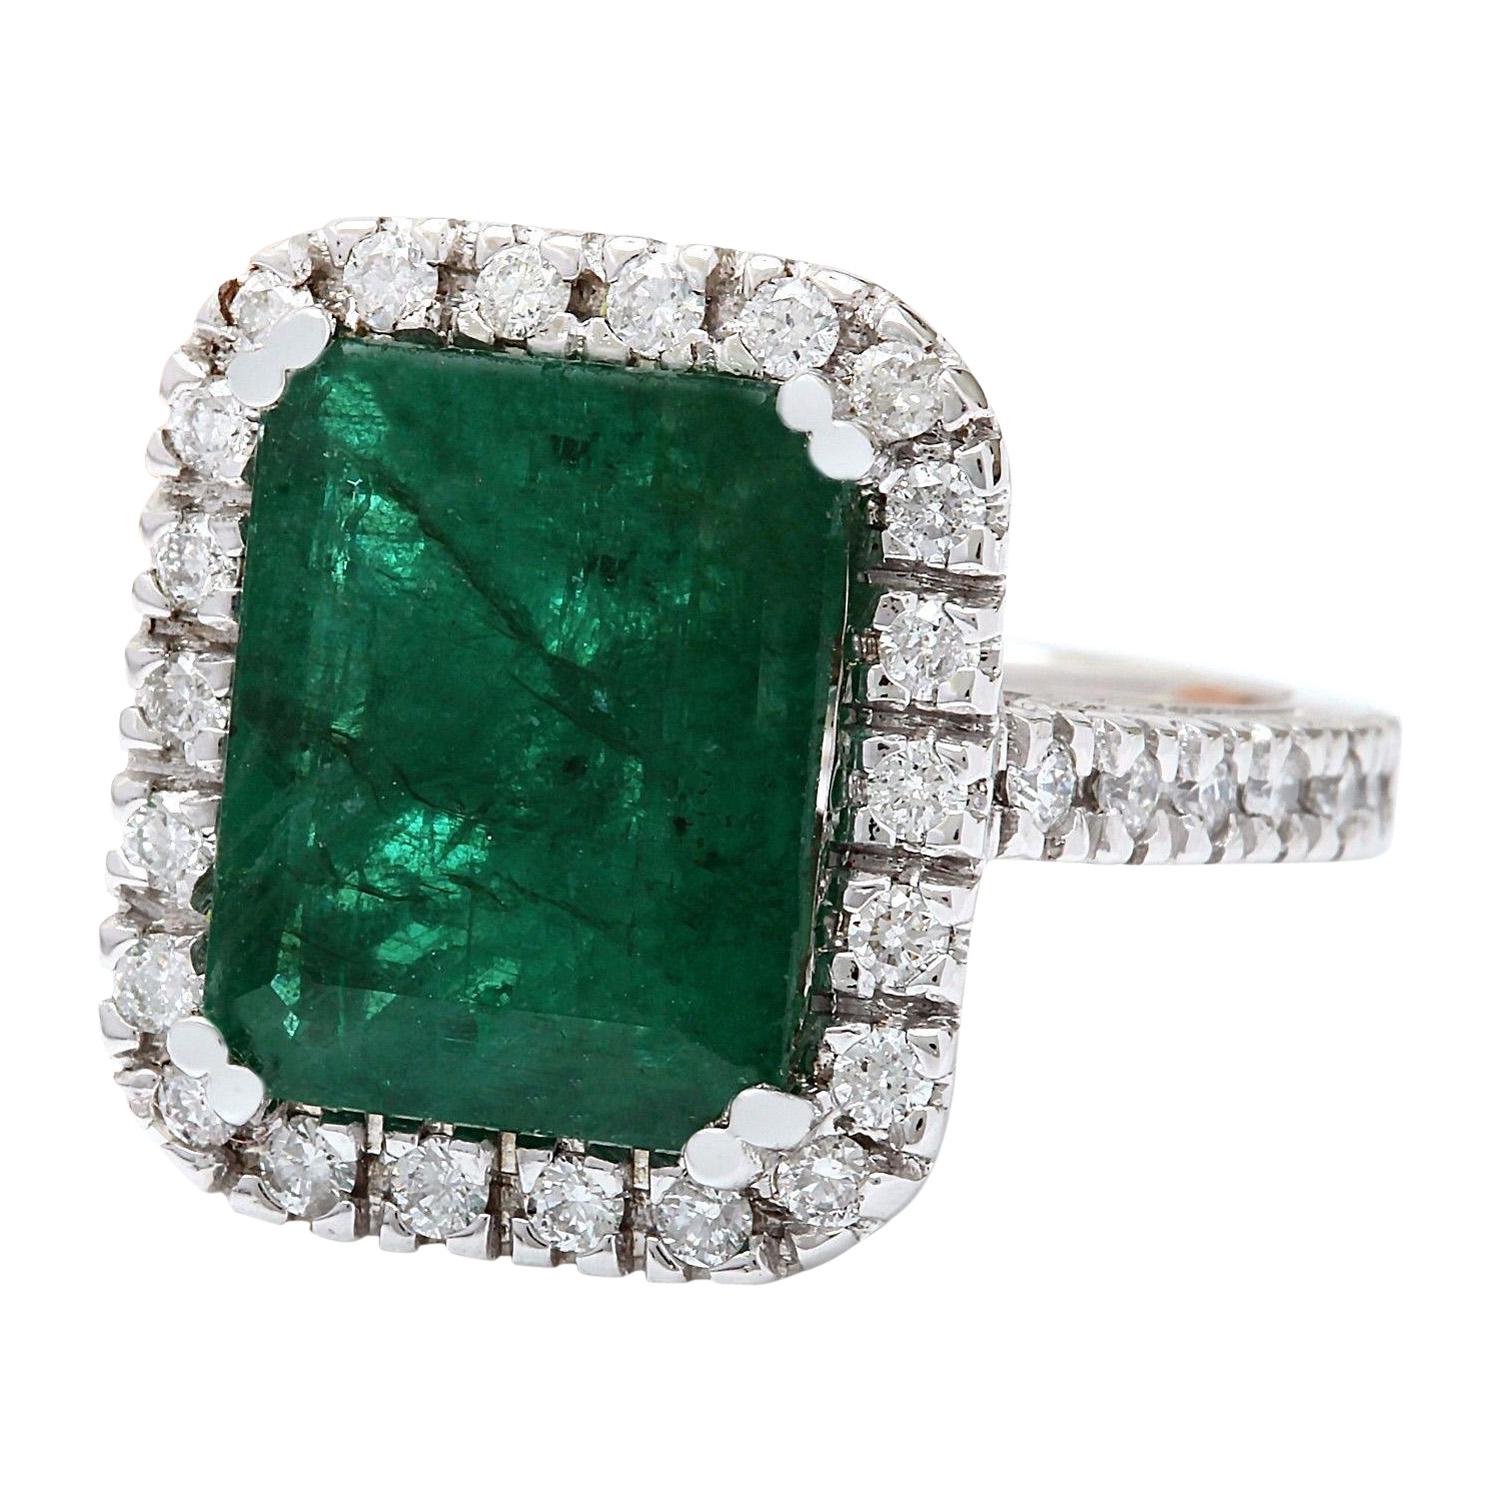 6.65 Carat Natural Emerald 18K Solid White Gold Diamond Ring
 Item Type: Ring
 Item Style: Engagement
 Material: 18K White Gold
 Mainstone: Emerald
 Stone Color: Green
 Stone Weight: 5.85 Carat
 Stone Shape: Princess
 Stone Quantity: 1
 Stone